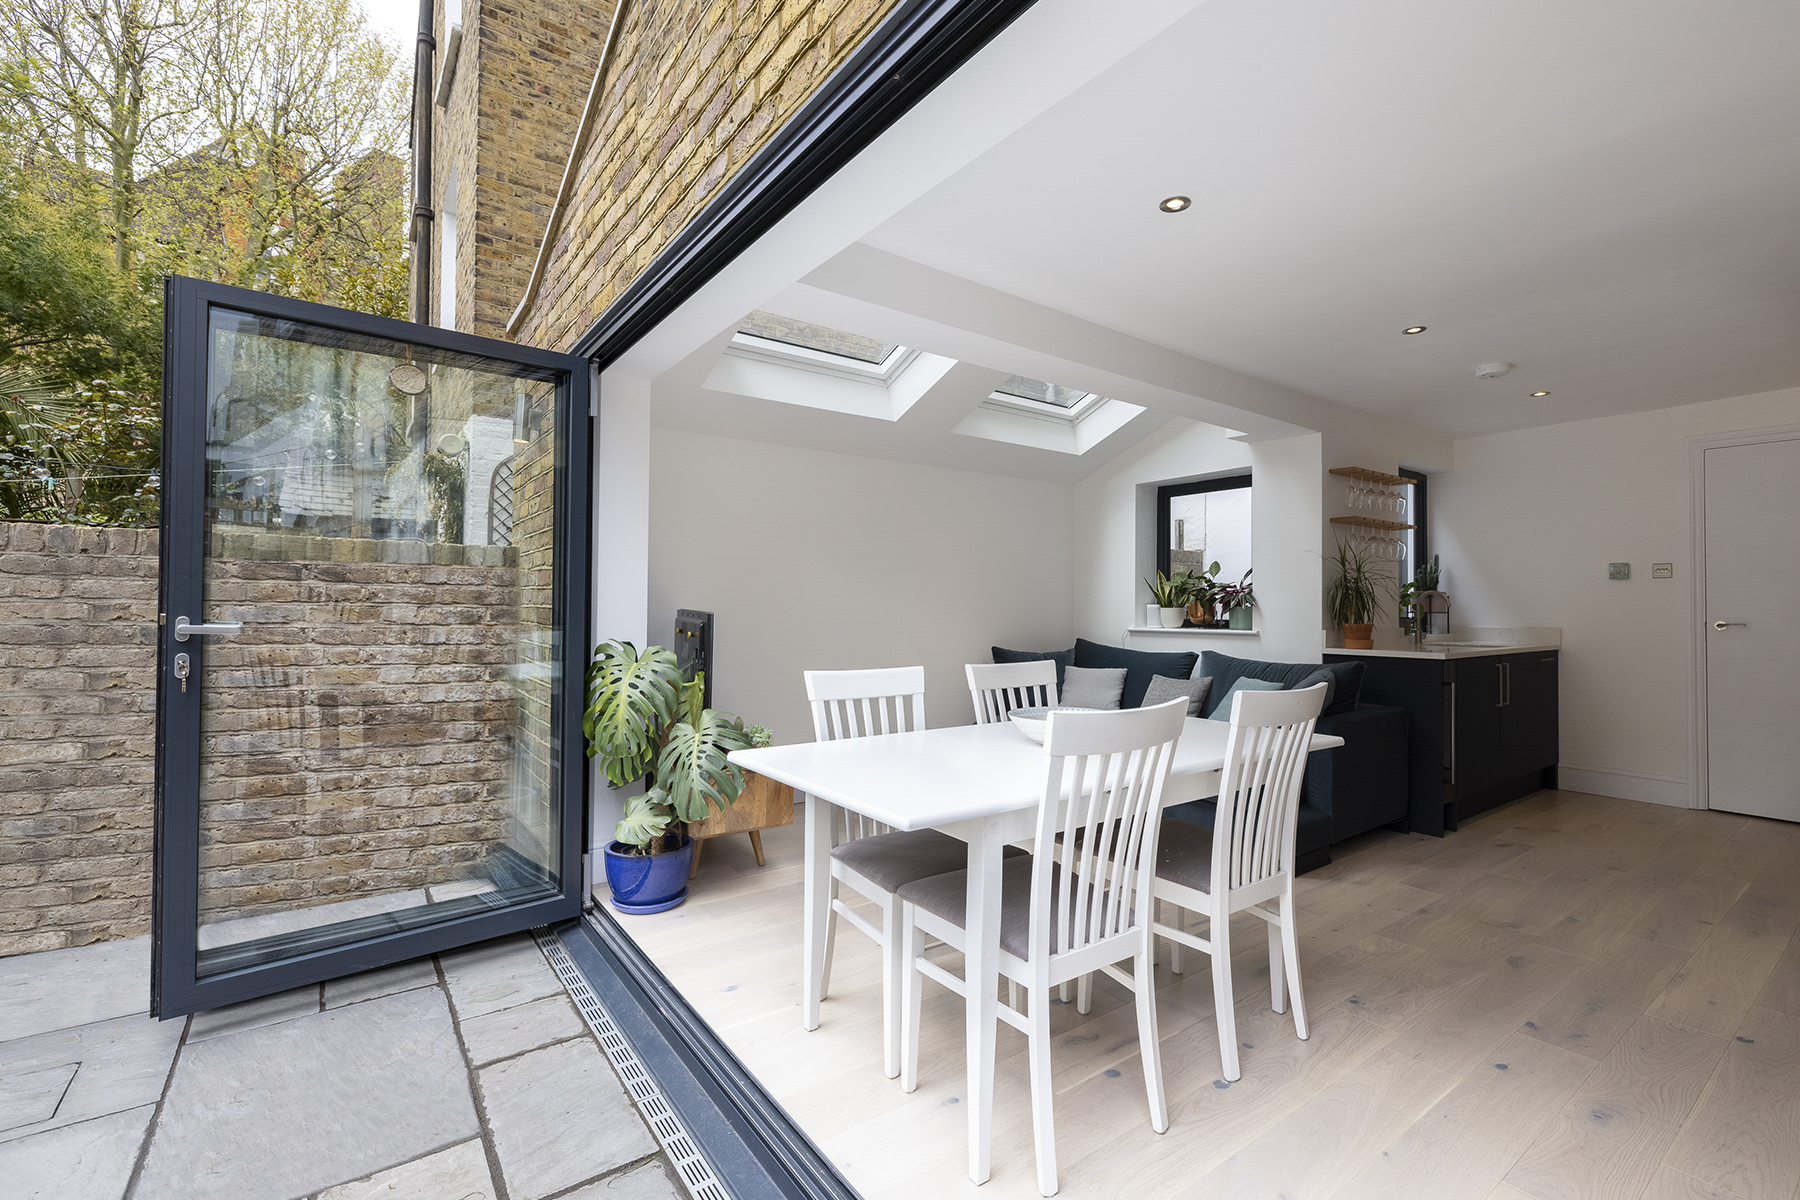 SE13 Project Featured in Real Homes